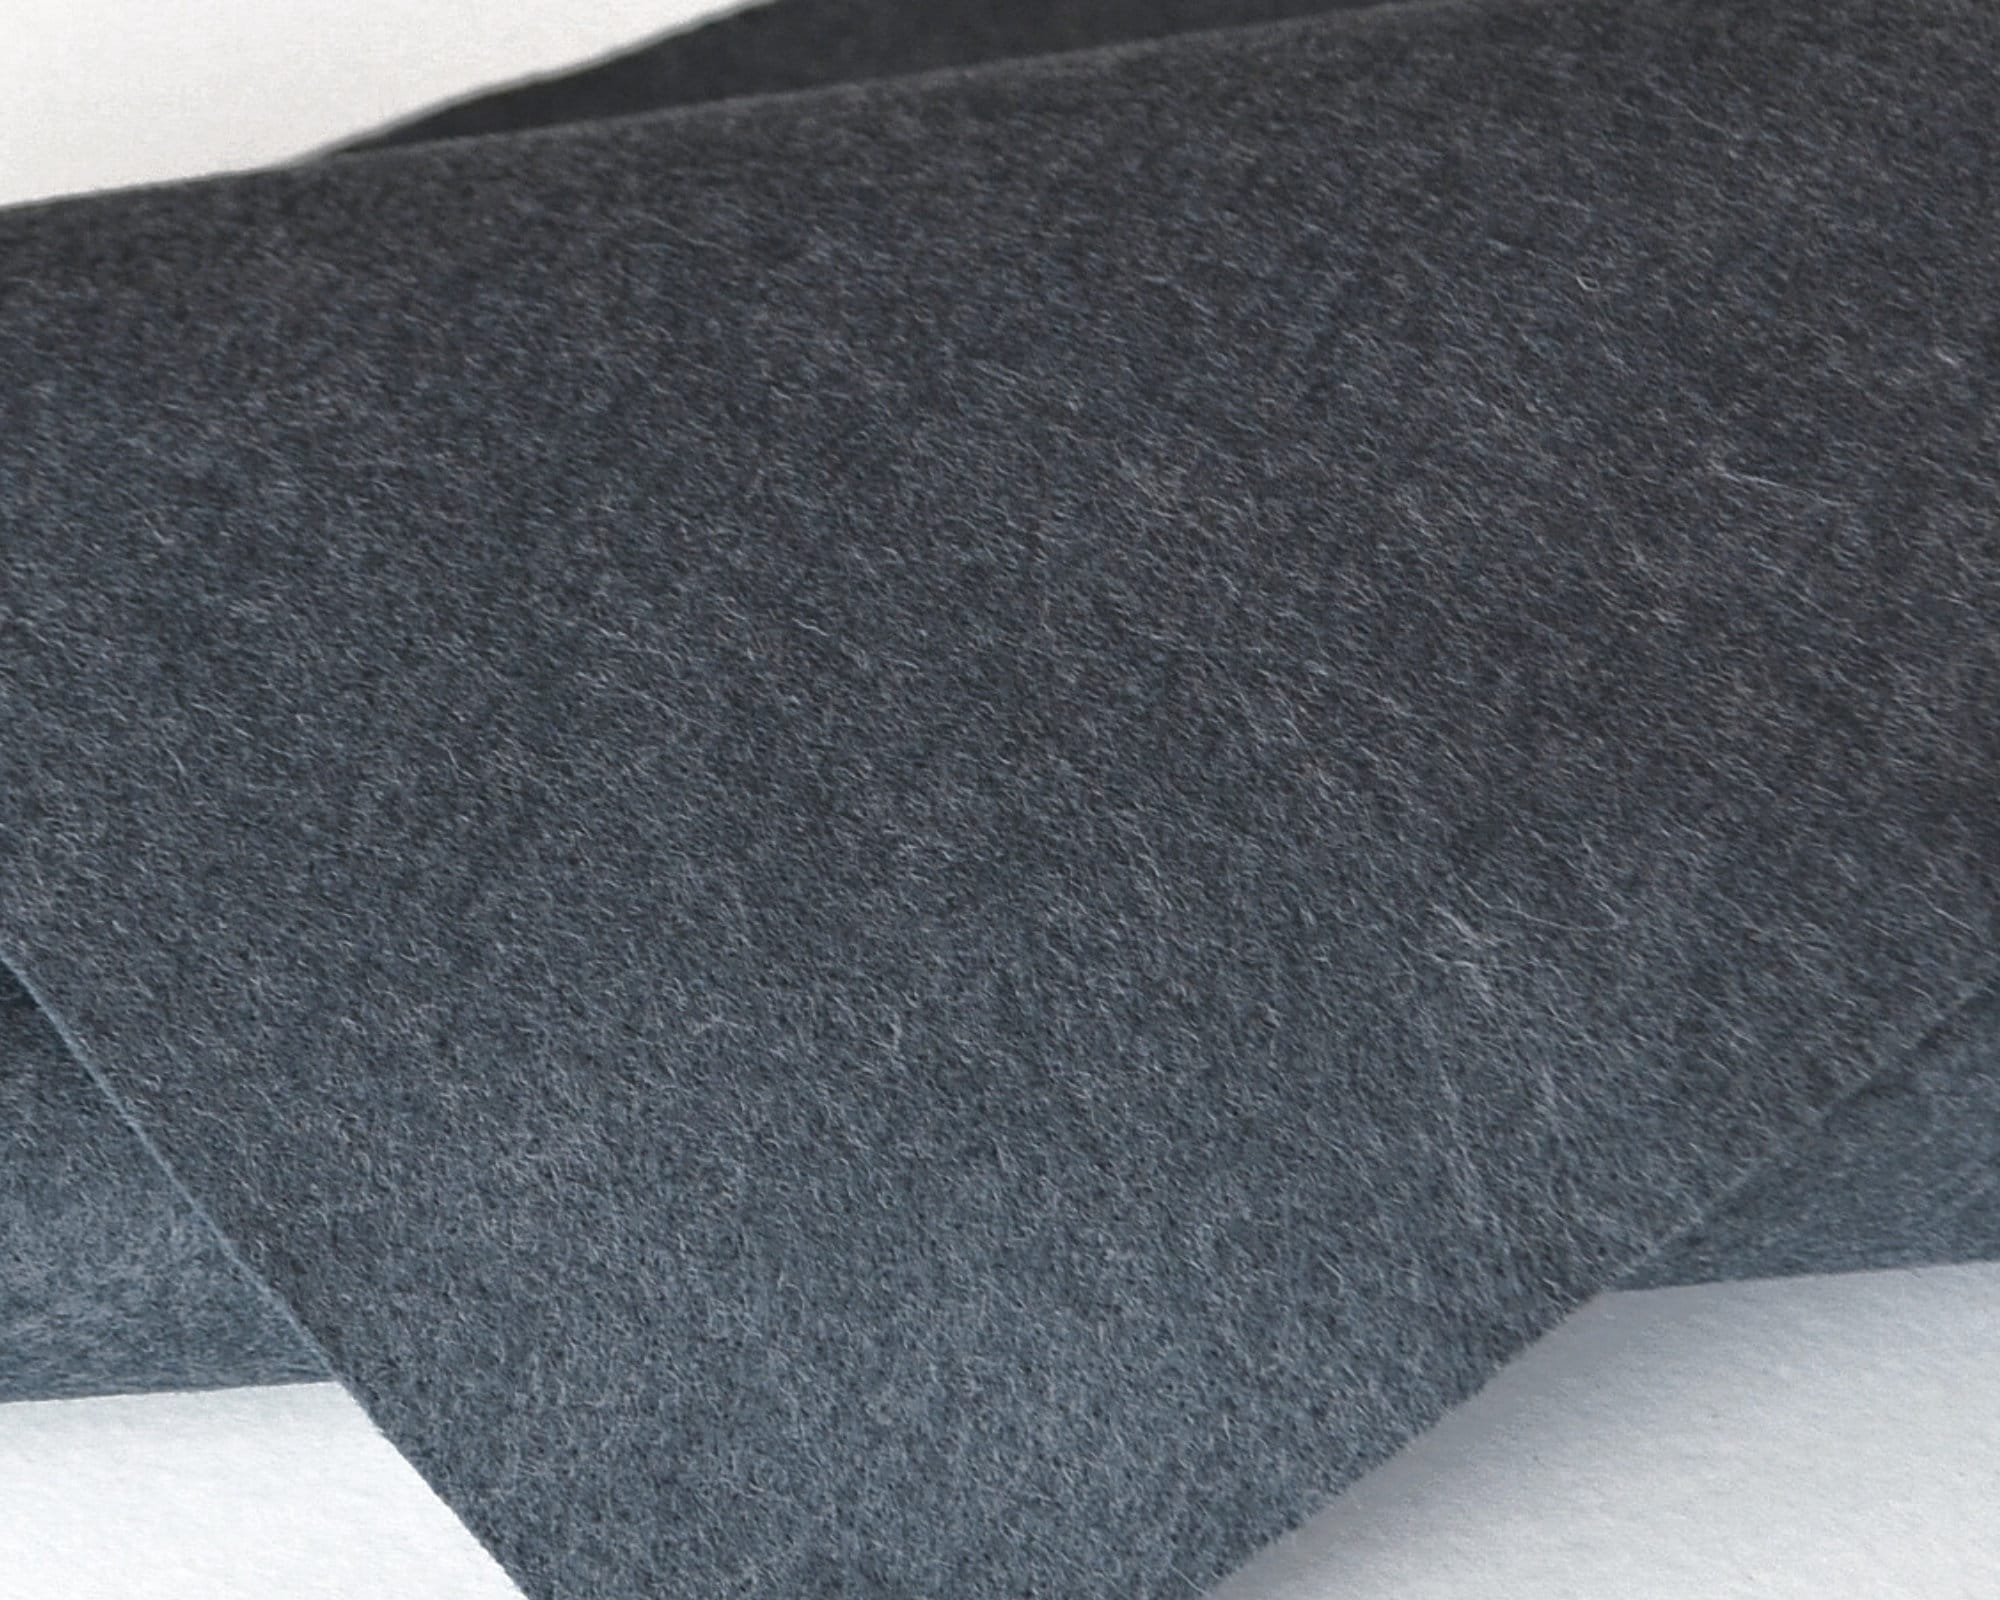 3mm Thick Felt by the Yard Light Grey Heathered Felt Pale Gray Marbled Flet  Mid Weight Polyester Felt textured Grey Felt Fast Shipping 